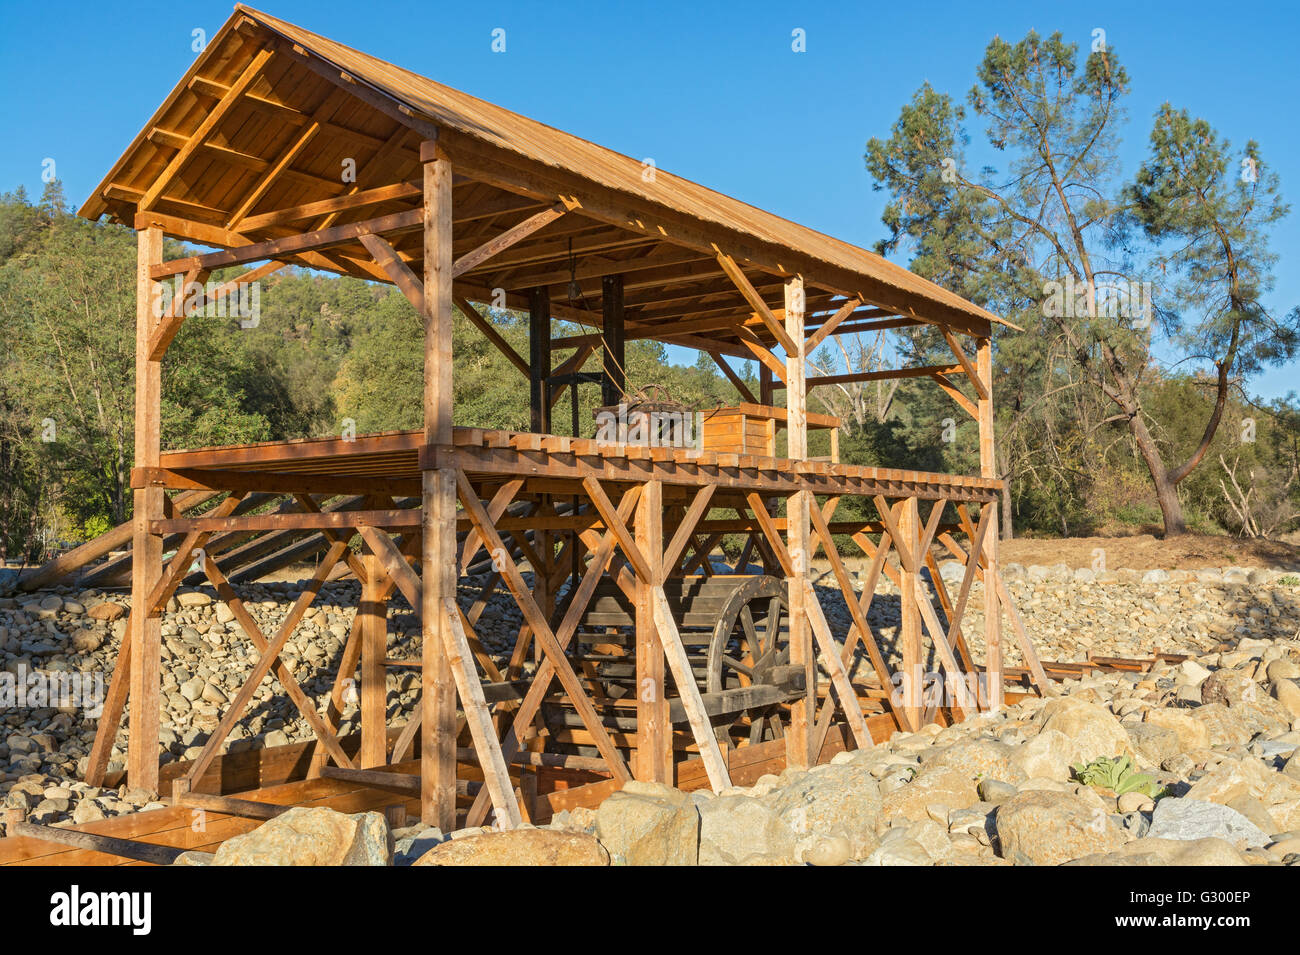 California, Coloma, Marshall Gold Discovery State Historic Park, Sutter's Mill replica Foto Stock